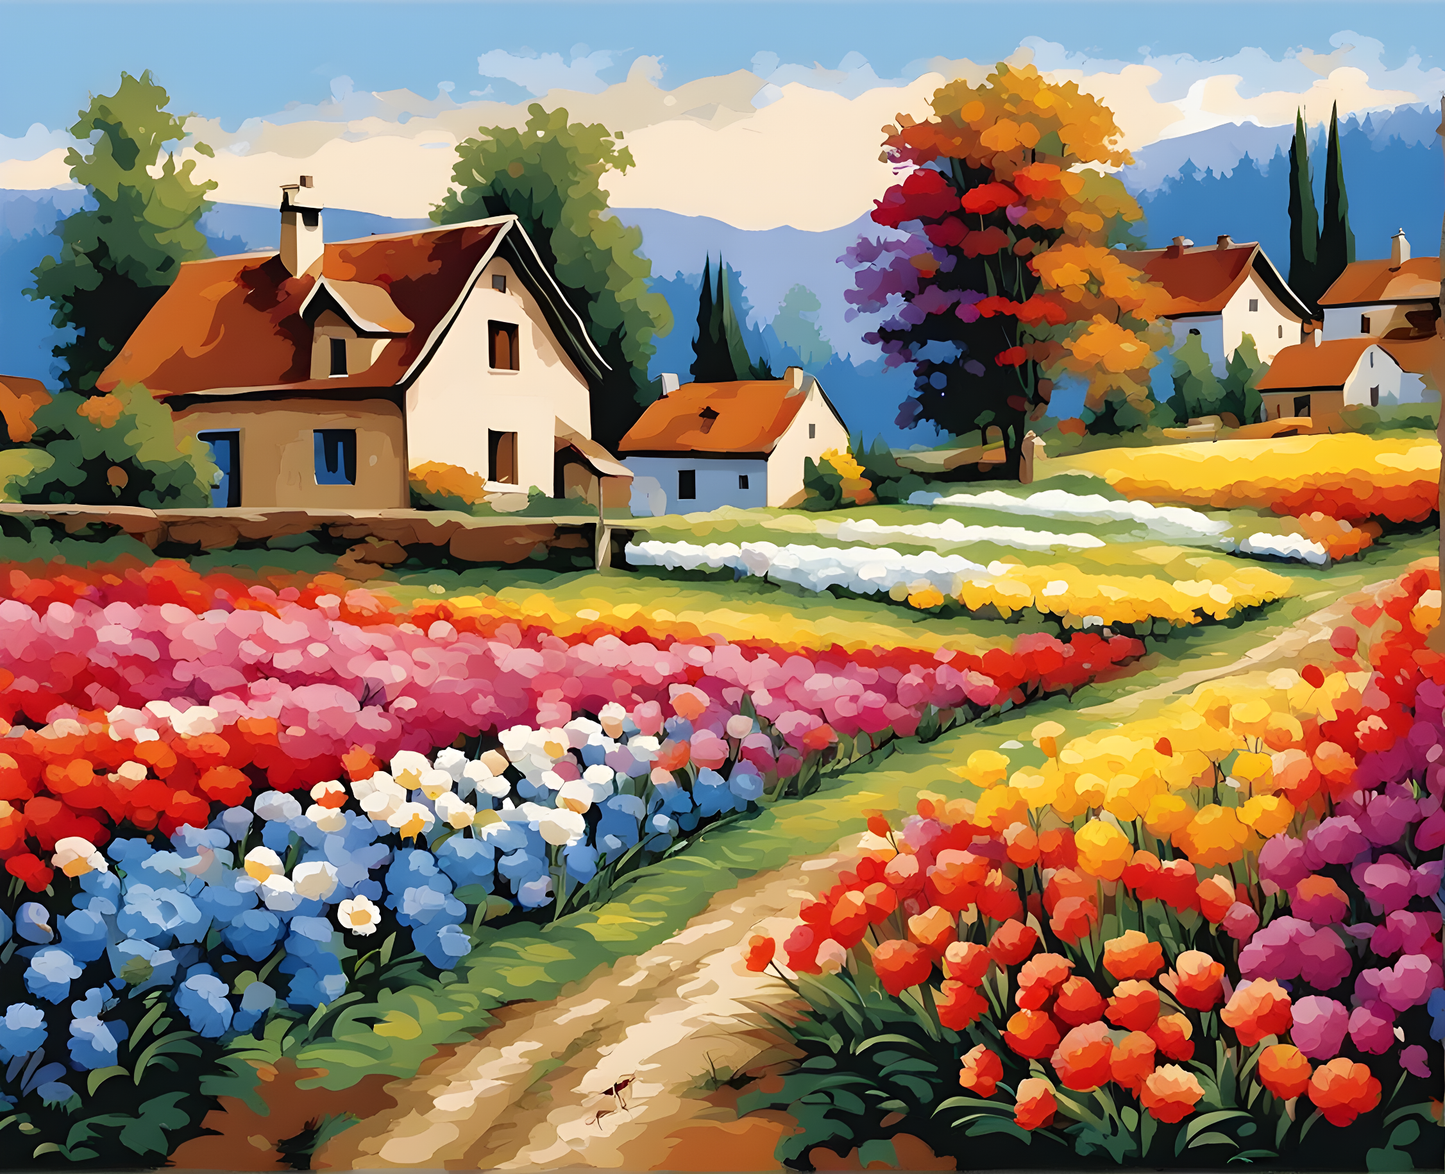 Colorful Flowers Field near a Village (2) - Van-Go Paint-By-Number Kit